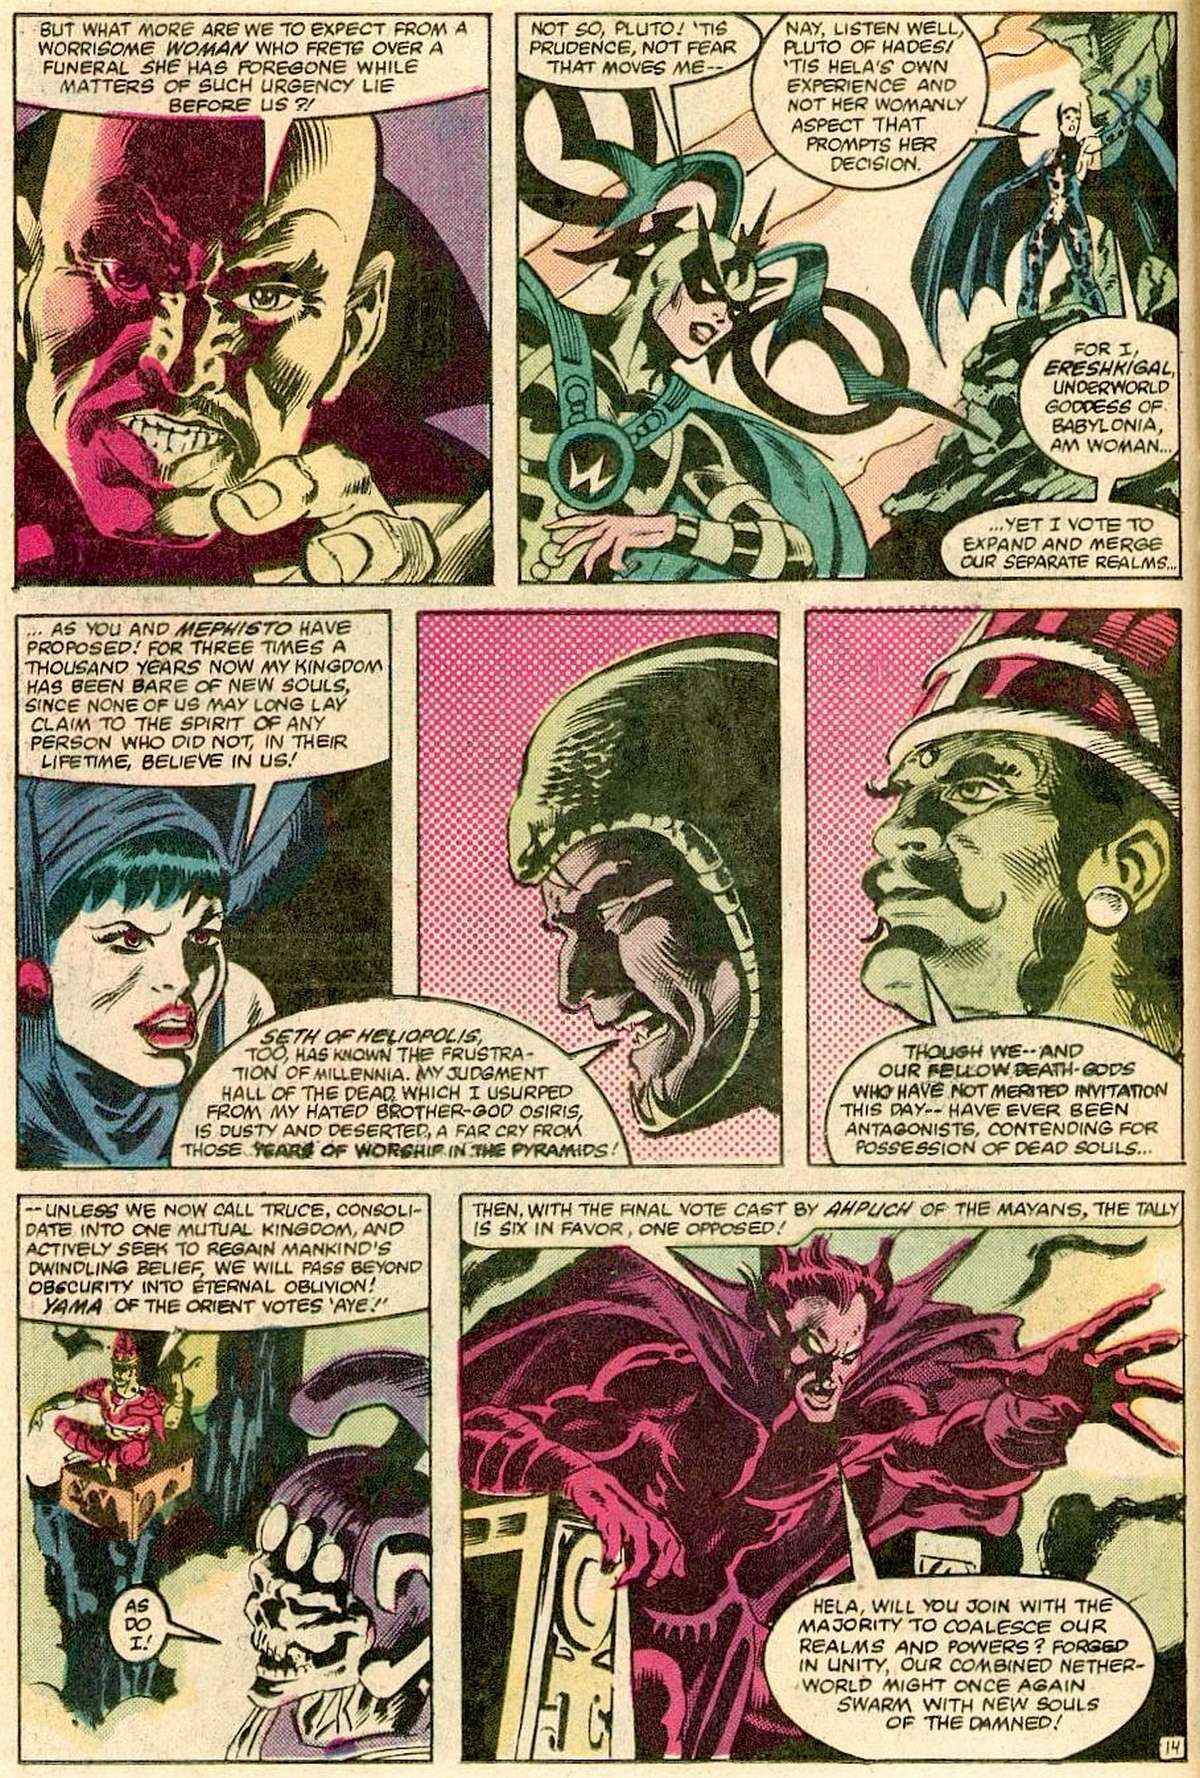 FEW MILLENNIA HAS PASSED SINCE DEMOGORGE CLEANSED THE EARTH OF THE CORRUPTED ELDER-GODS. AND THE DEATH GODS OF THE MARVEL UNIVERSE GATHERS TO PROPOSE THE IDEA OF A POSSIBLE UNION AMONG THEIR DIMENSIONS .THESE INCLUDE THE LIKE OF :MEPHISTO,HELA,PLUTO,SET,ERESHKIGAL ,YAMA&AHPUCH